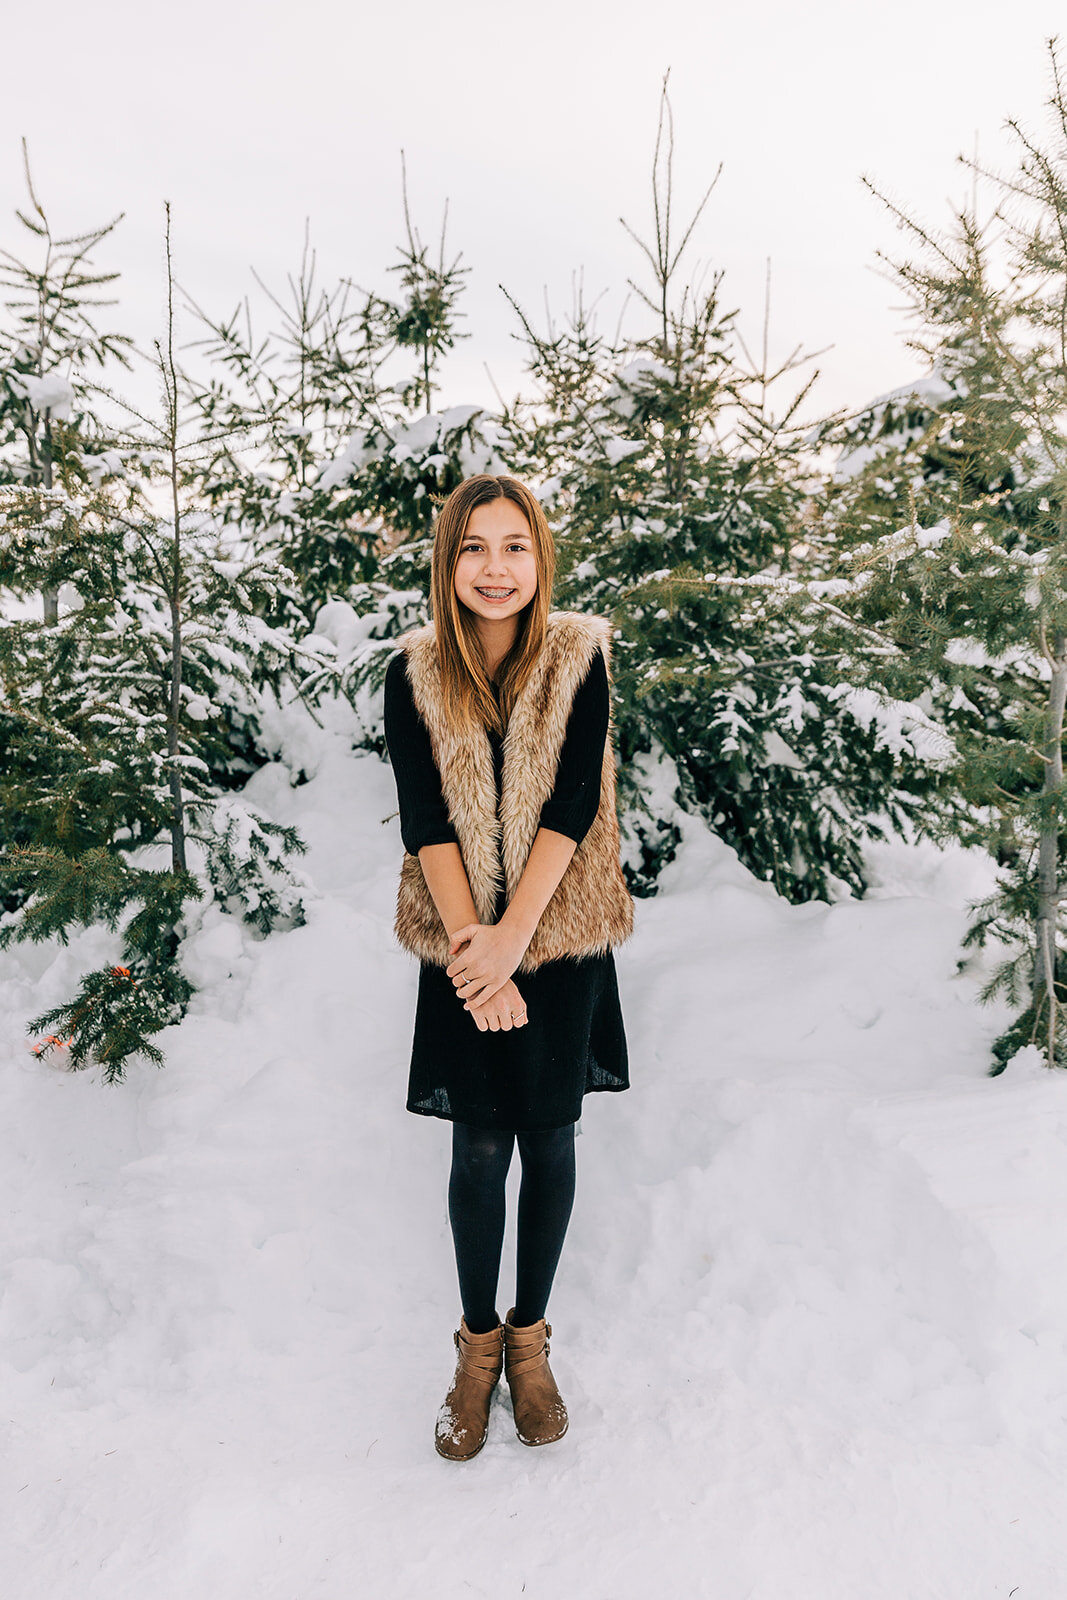  preteen faux fur vest styling braces winter fashion family pictures daughters kid fashion family picture styling inspiration family pose ideas winter photoshoot snowy pictures adams acres tree farm family photographers in utah professional family ph